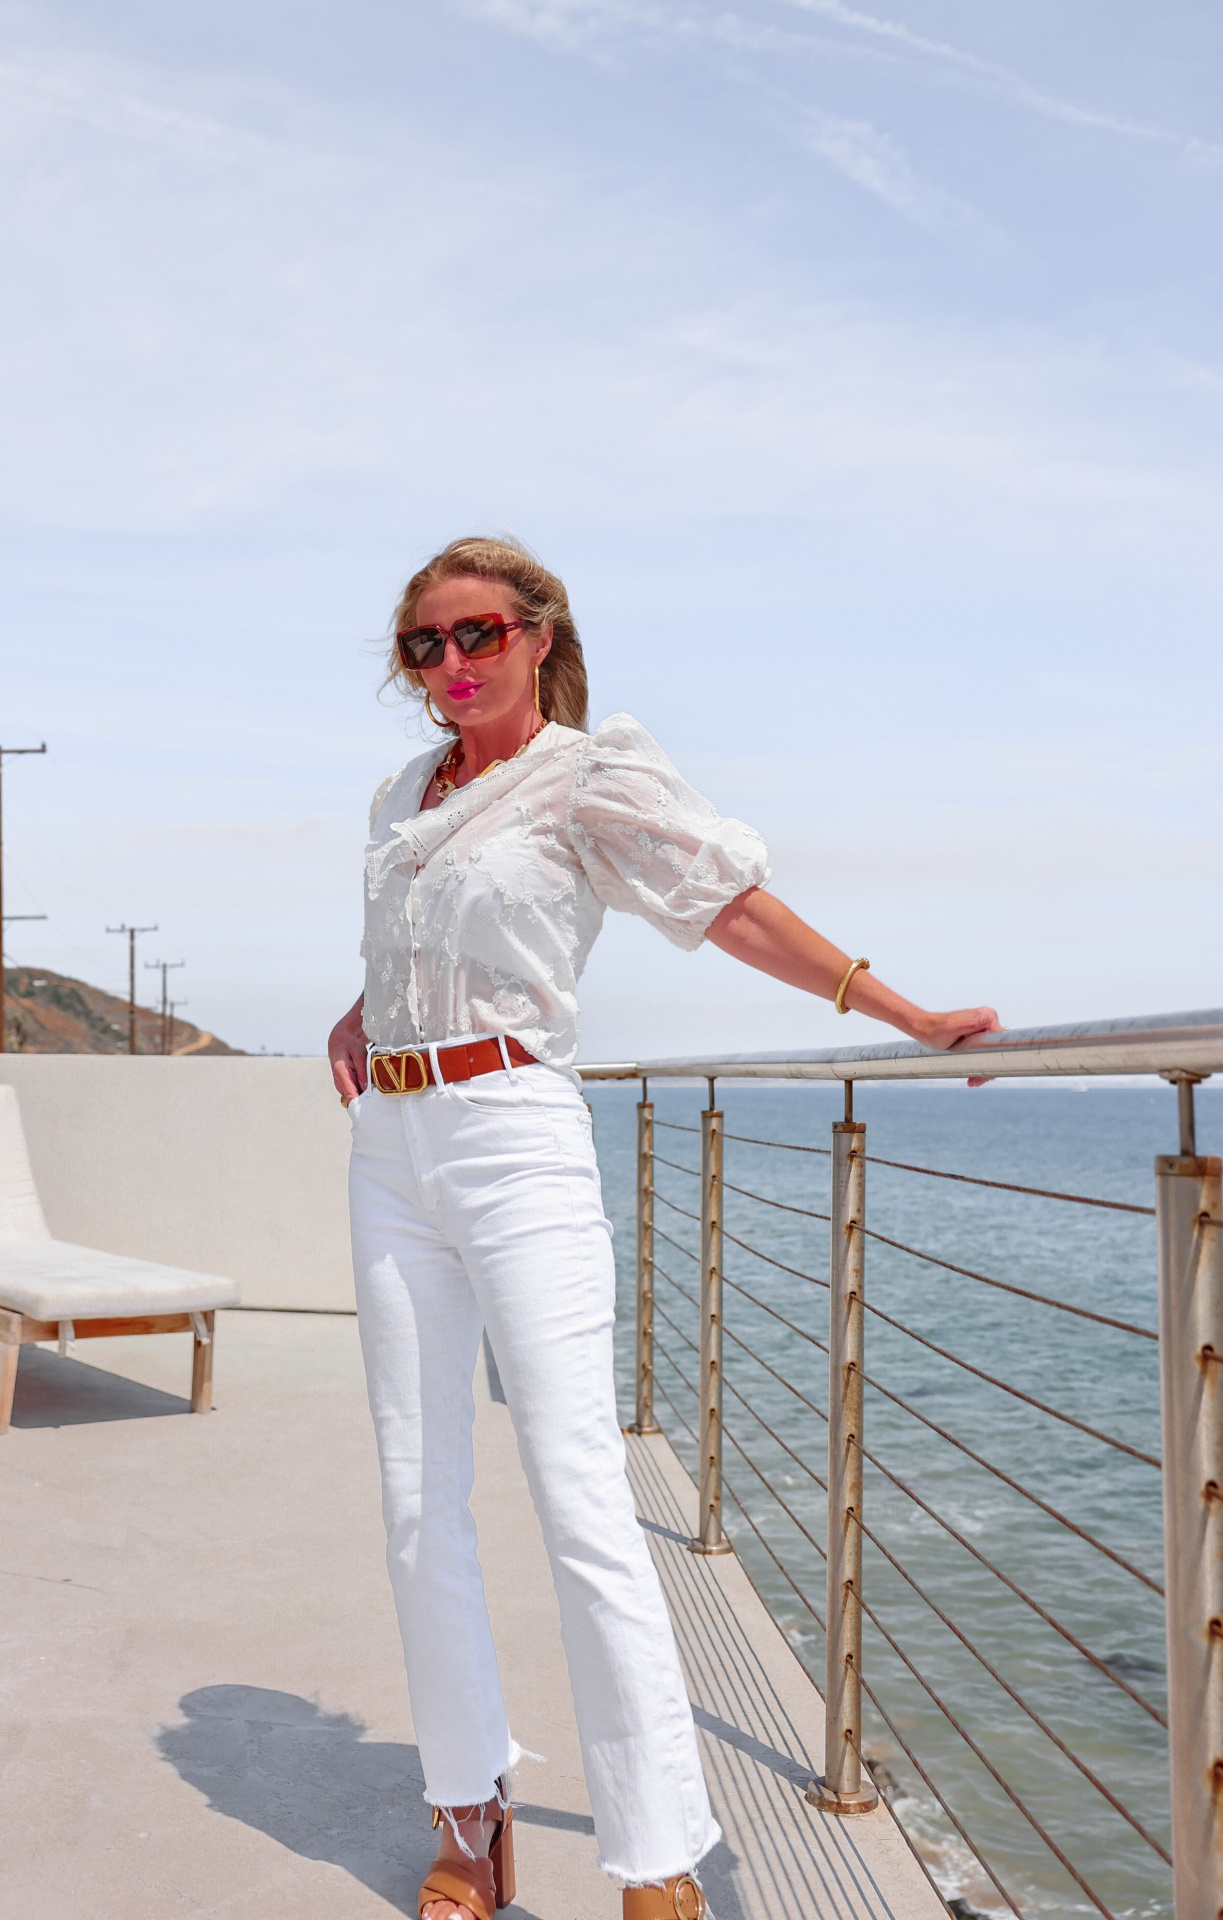 white tops for summer, best white top, best white tops for summer, statement tops, white statement tops, summer mom style, best summer mom outfits, summer mom outfits 2022, casual mom outfits summer, stylish mom outfits 2022, fashion for moms in their 30s, fashion for moms in their 40s, cute mom outfits, casual mom outfits, erin busbee, busbee style, fashion over 40, malibu, california, white maje blouse, white mother hustler jeans, see by chloe platform heels, saint laurent square sunglasses, paco rabbane chunky gold necklace, dean davidson hoops